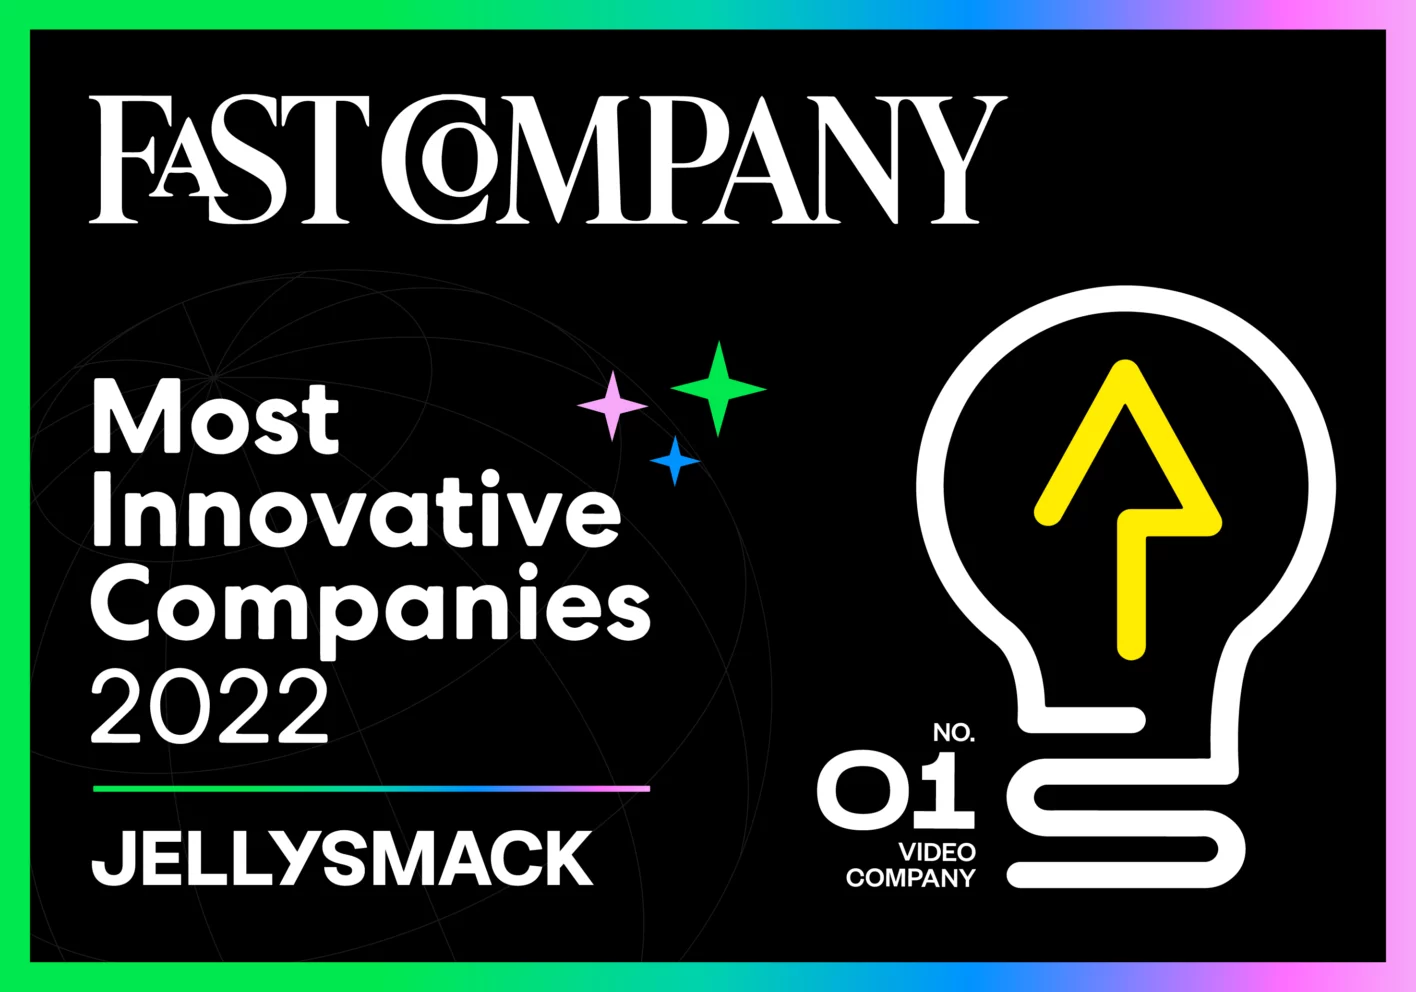 Black background poster with "Fast Company" logo in white announcing Jellysmack Most Innovative Company 2022 in the Video Category.